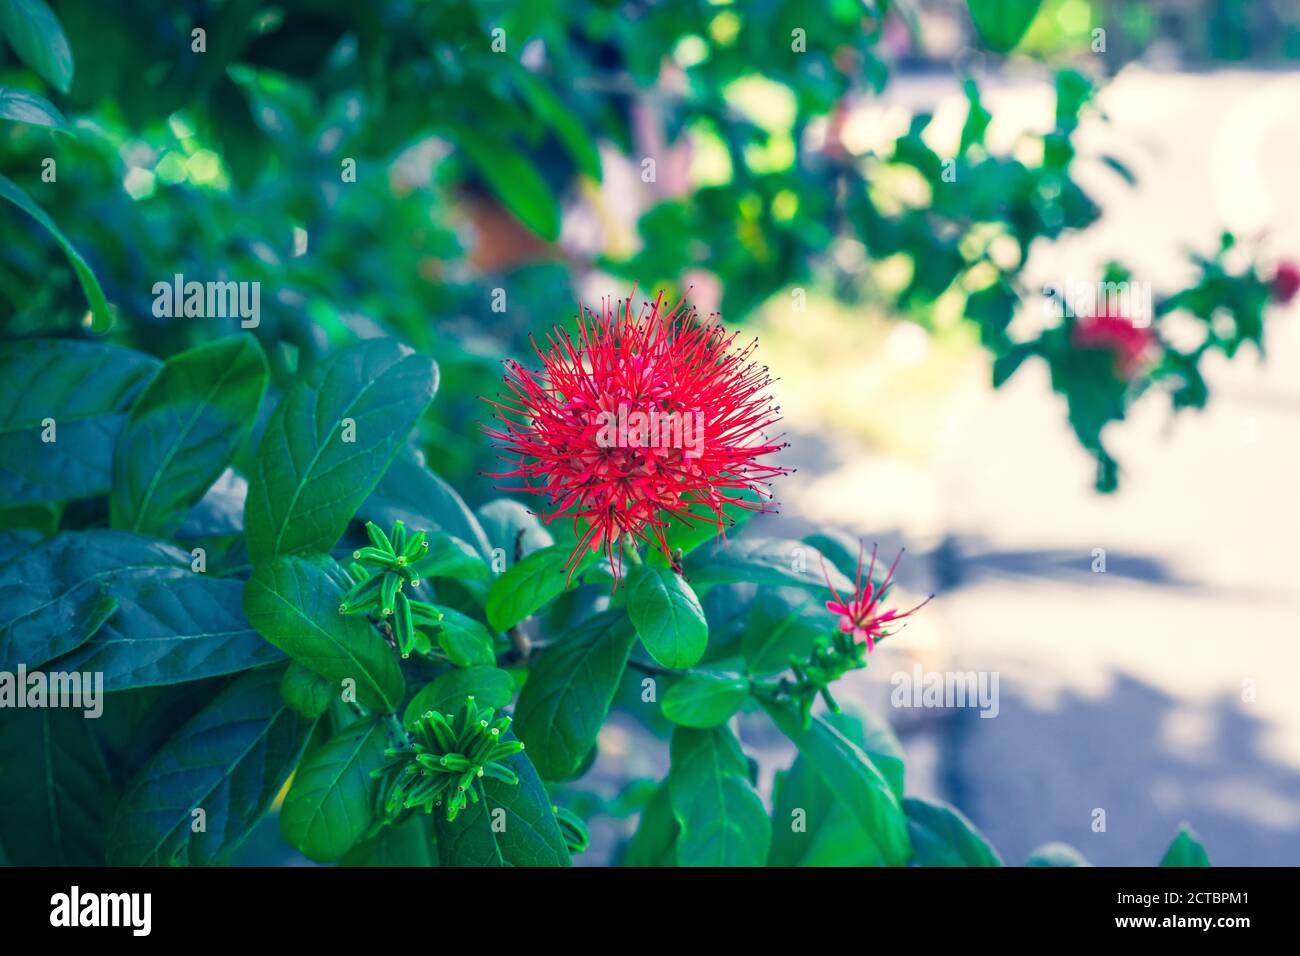 Flowering Combretum constrictum bush. Red flower with stamens on Thailand Powder Puff or Petit Badamier blooming tree Stock Photo